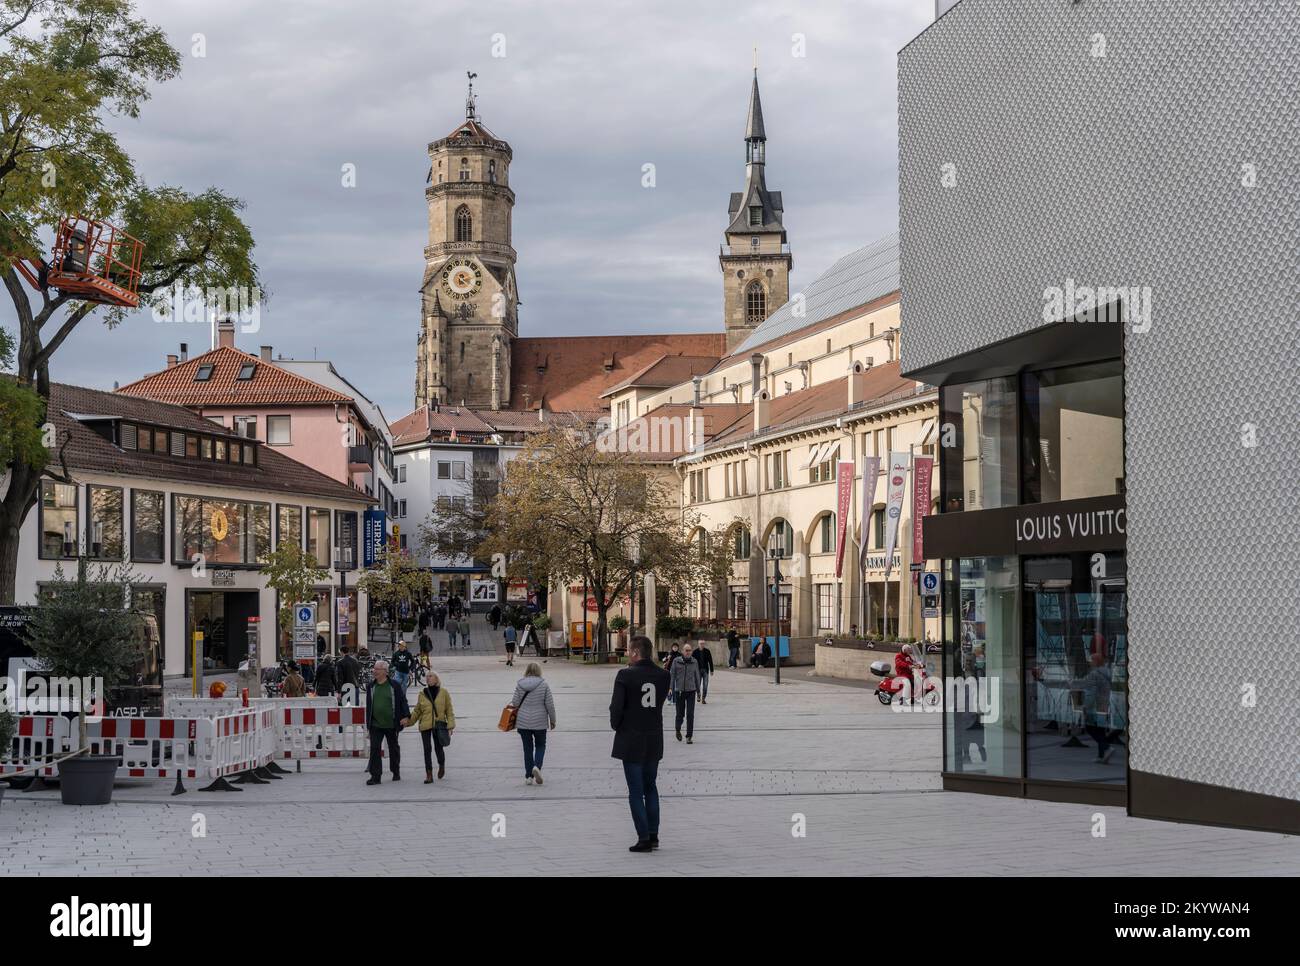 STUTTGART, 2022 november 08; cityscape with  Stiftskirche church huge bell towers loomig out of old buildings on pedetrian precinct, shot in bright fa Stock Photo